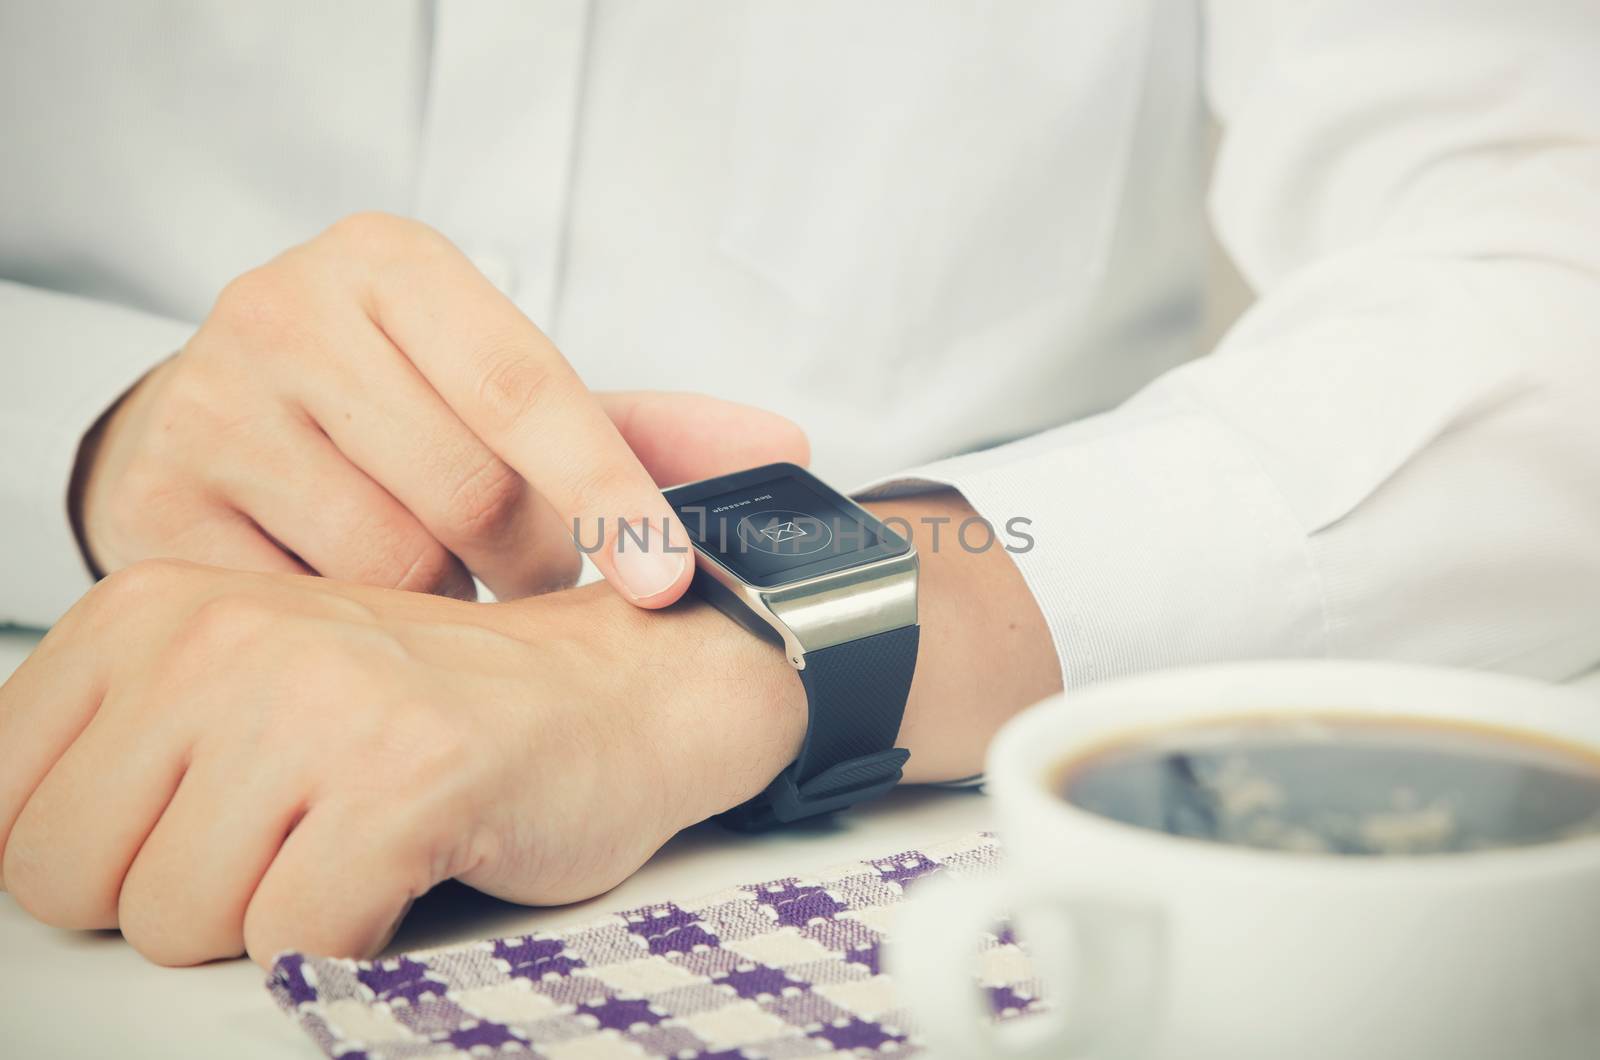 Businessman working with smart watch in restaurant by simpson33